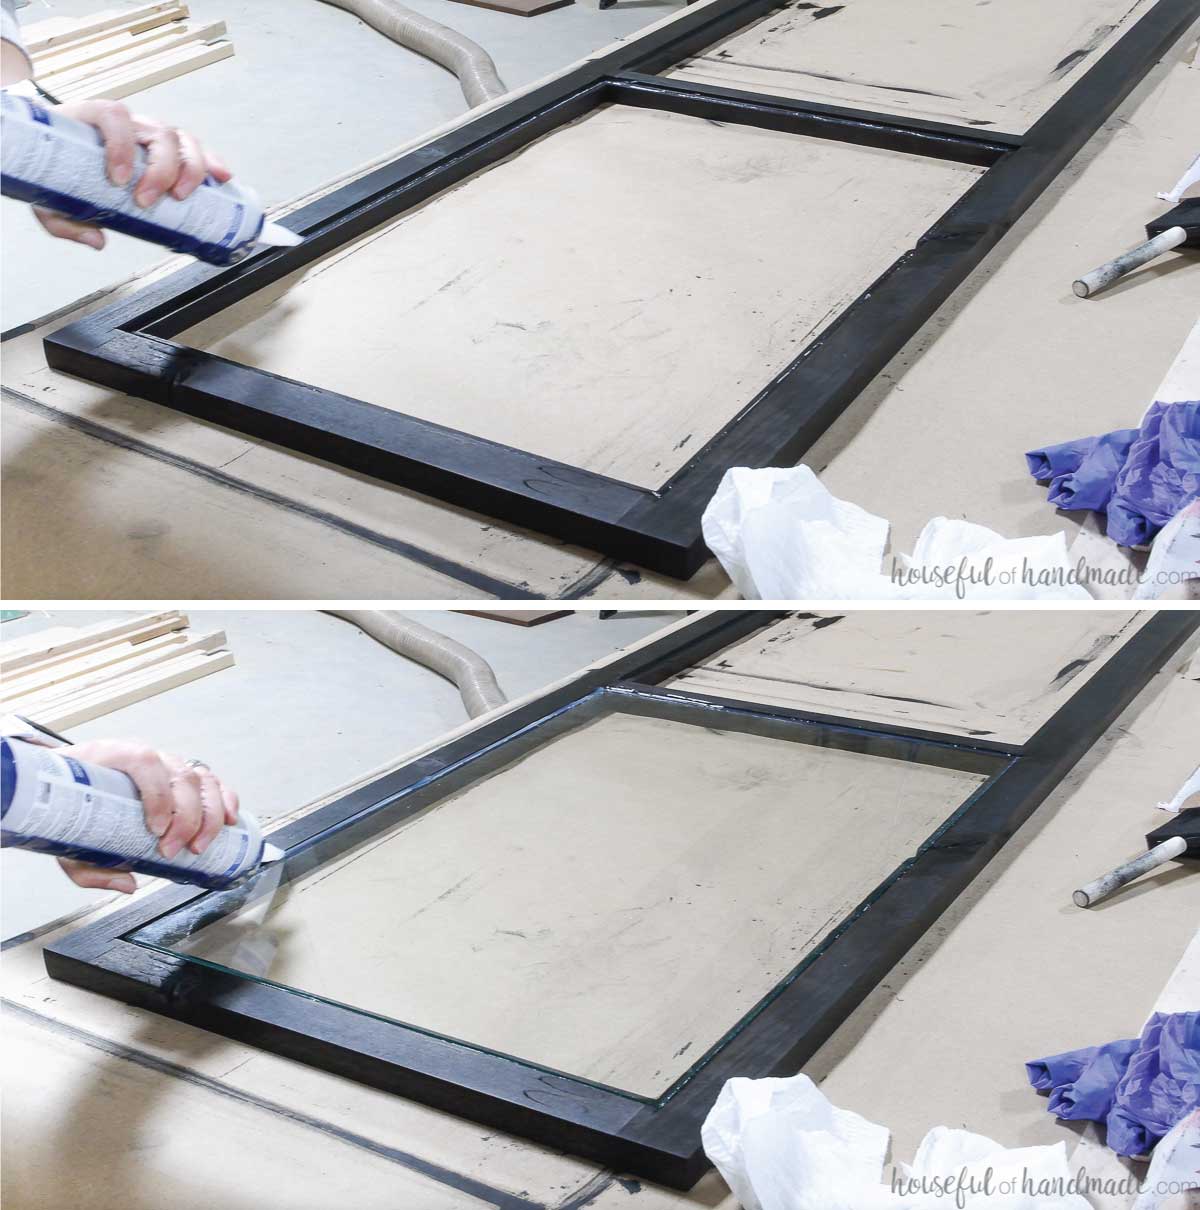 Installing glass into the DIY cabinet doors that were stained black with clear silicone. 